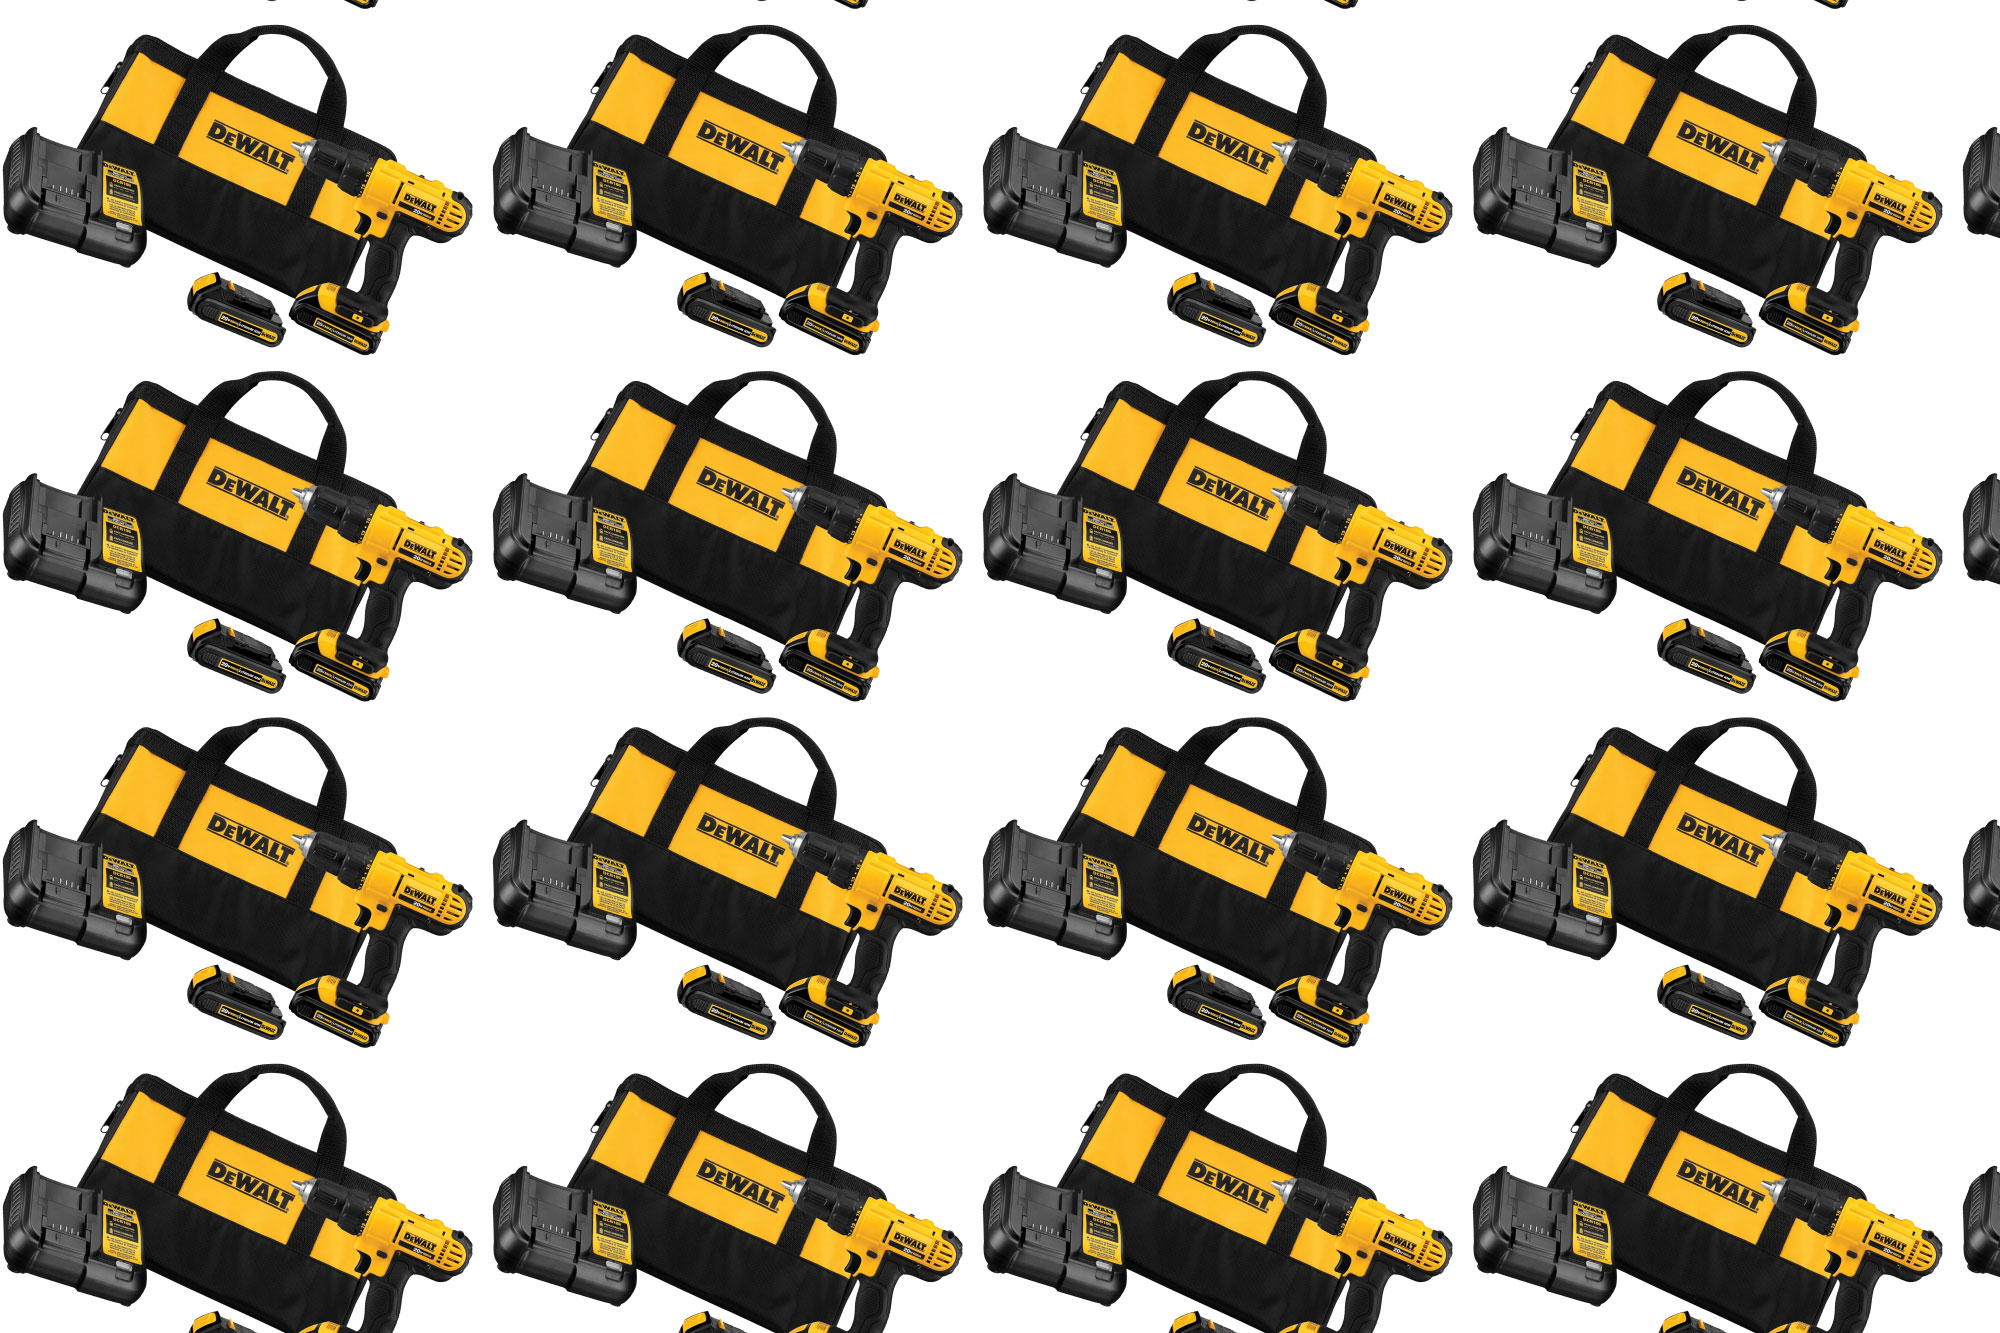 If you’re stumped for gifts, this DeWalt drill/driver kit is 45% off at Amazon and ships before Christmas